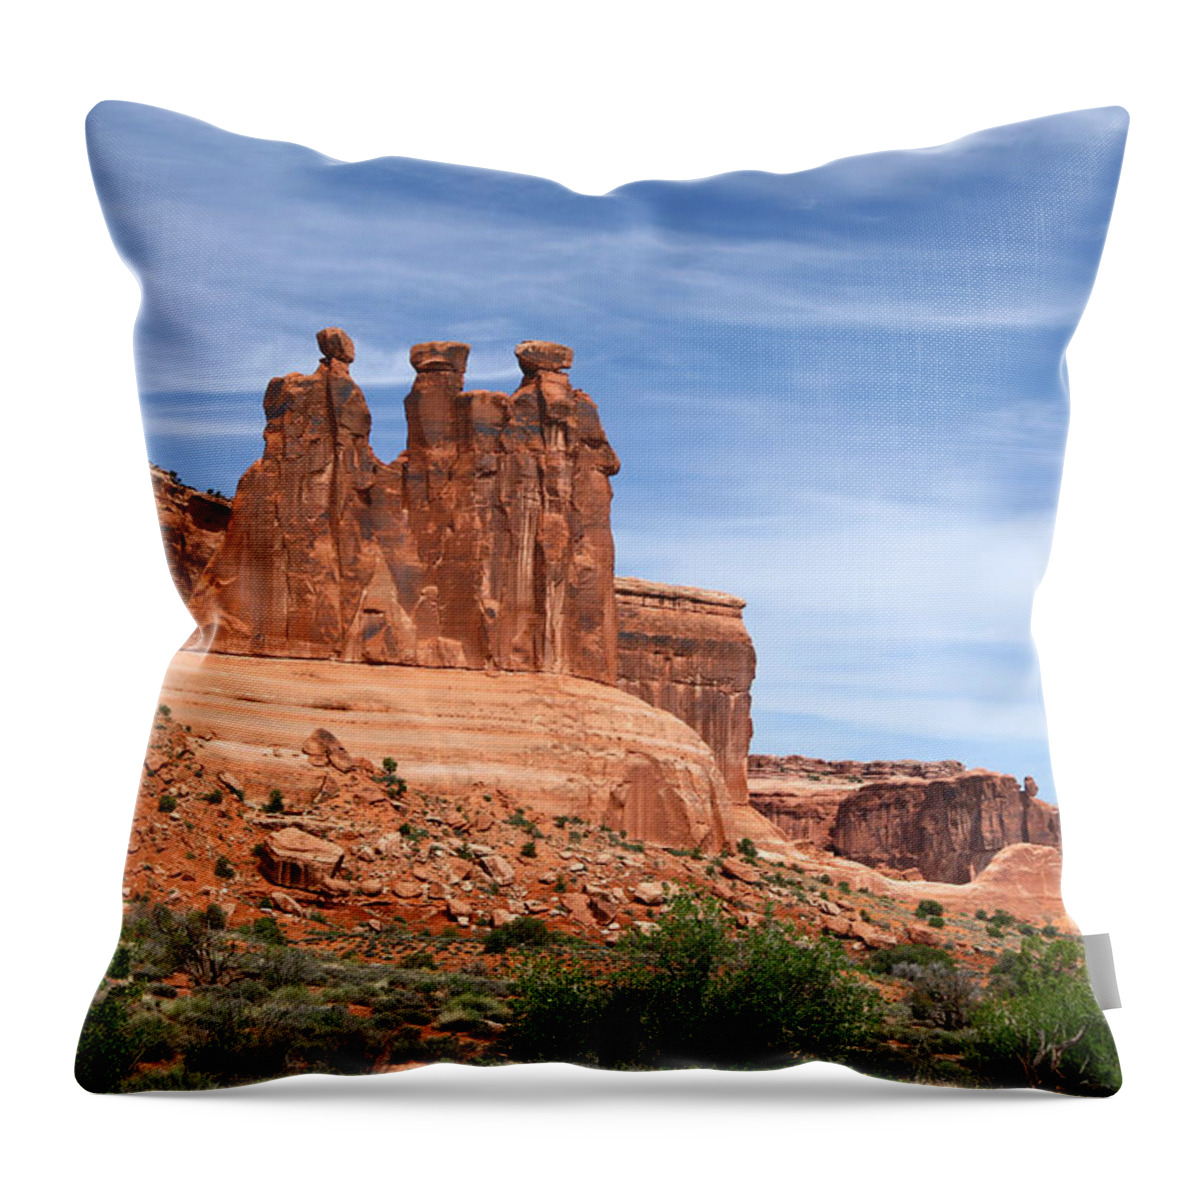 Three Gossips Throw Pillow featuring the digital art Three Gossips - Arches National Park by Georgia Clare